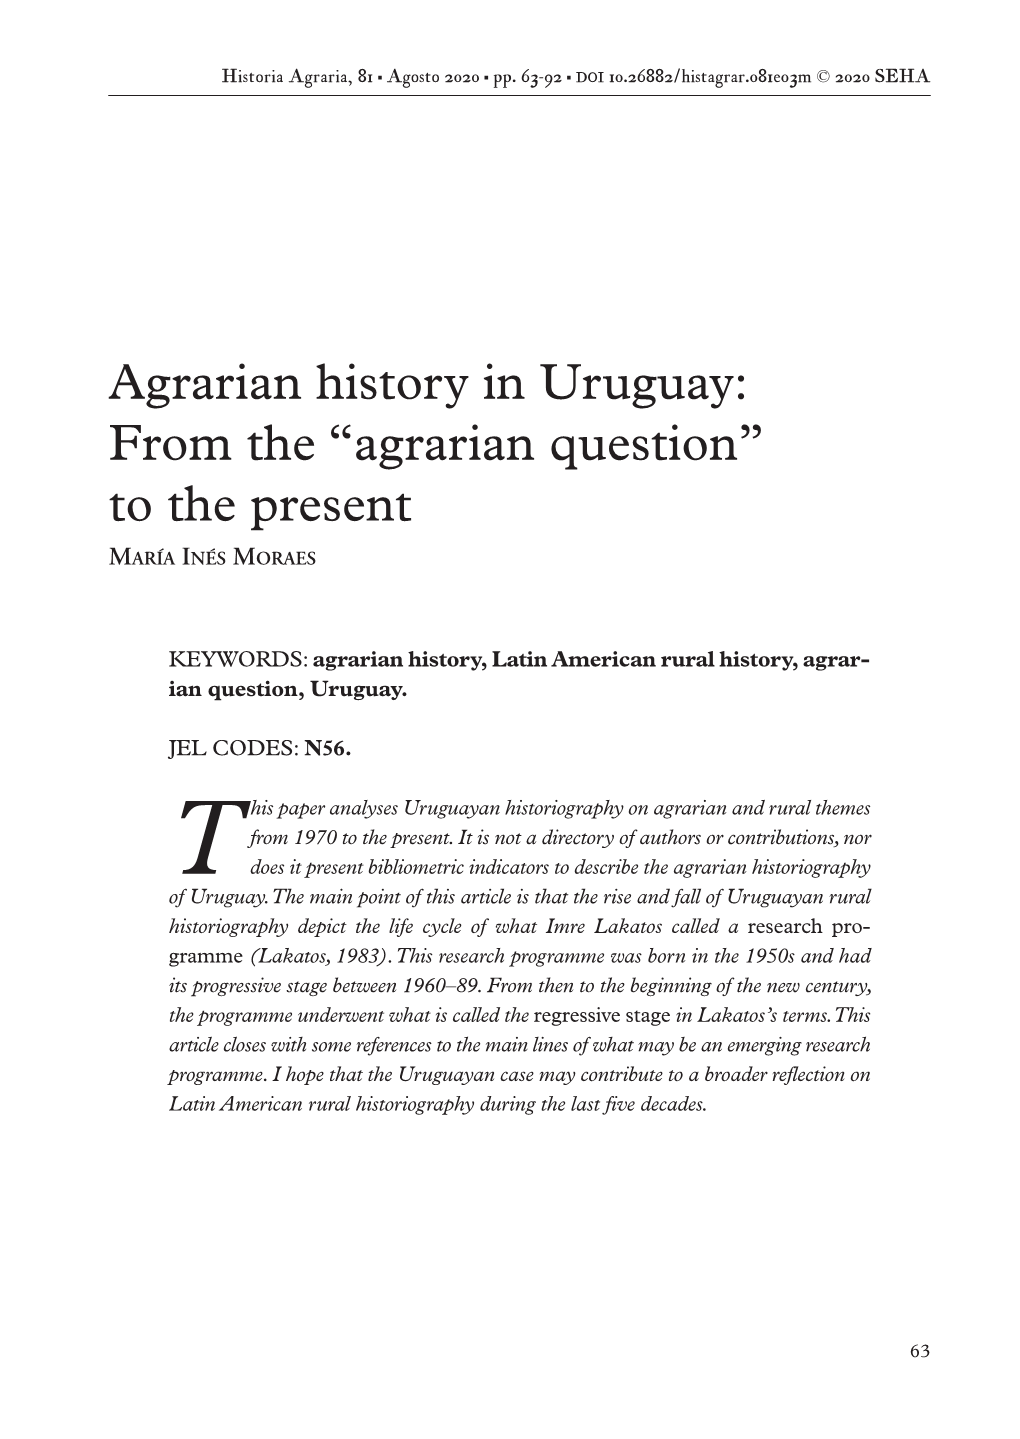 Agrarian History in Uruguay: from the “Agrarian Question” to the Present MARÍA INÉS MORAES